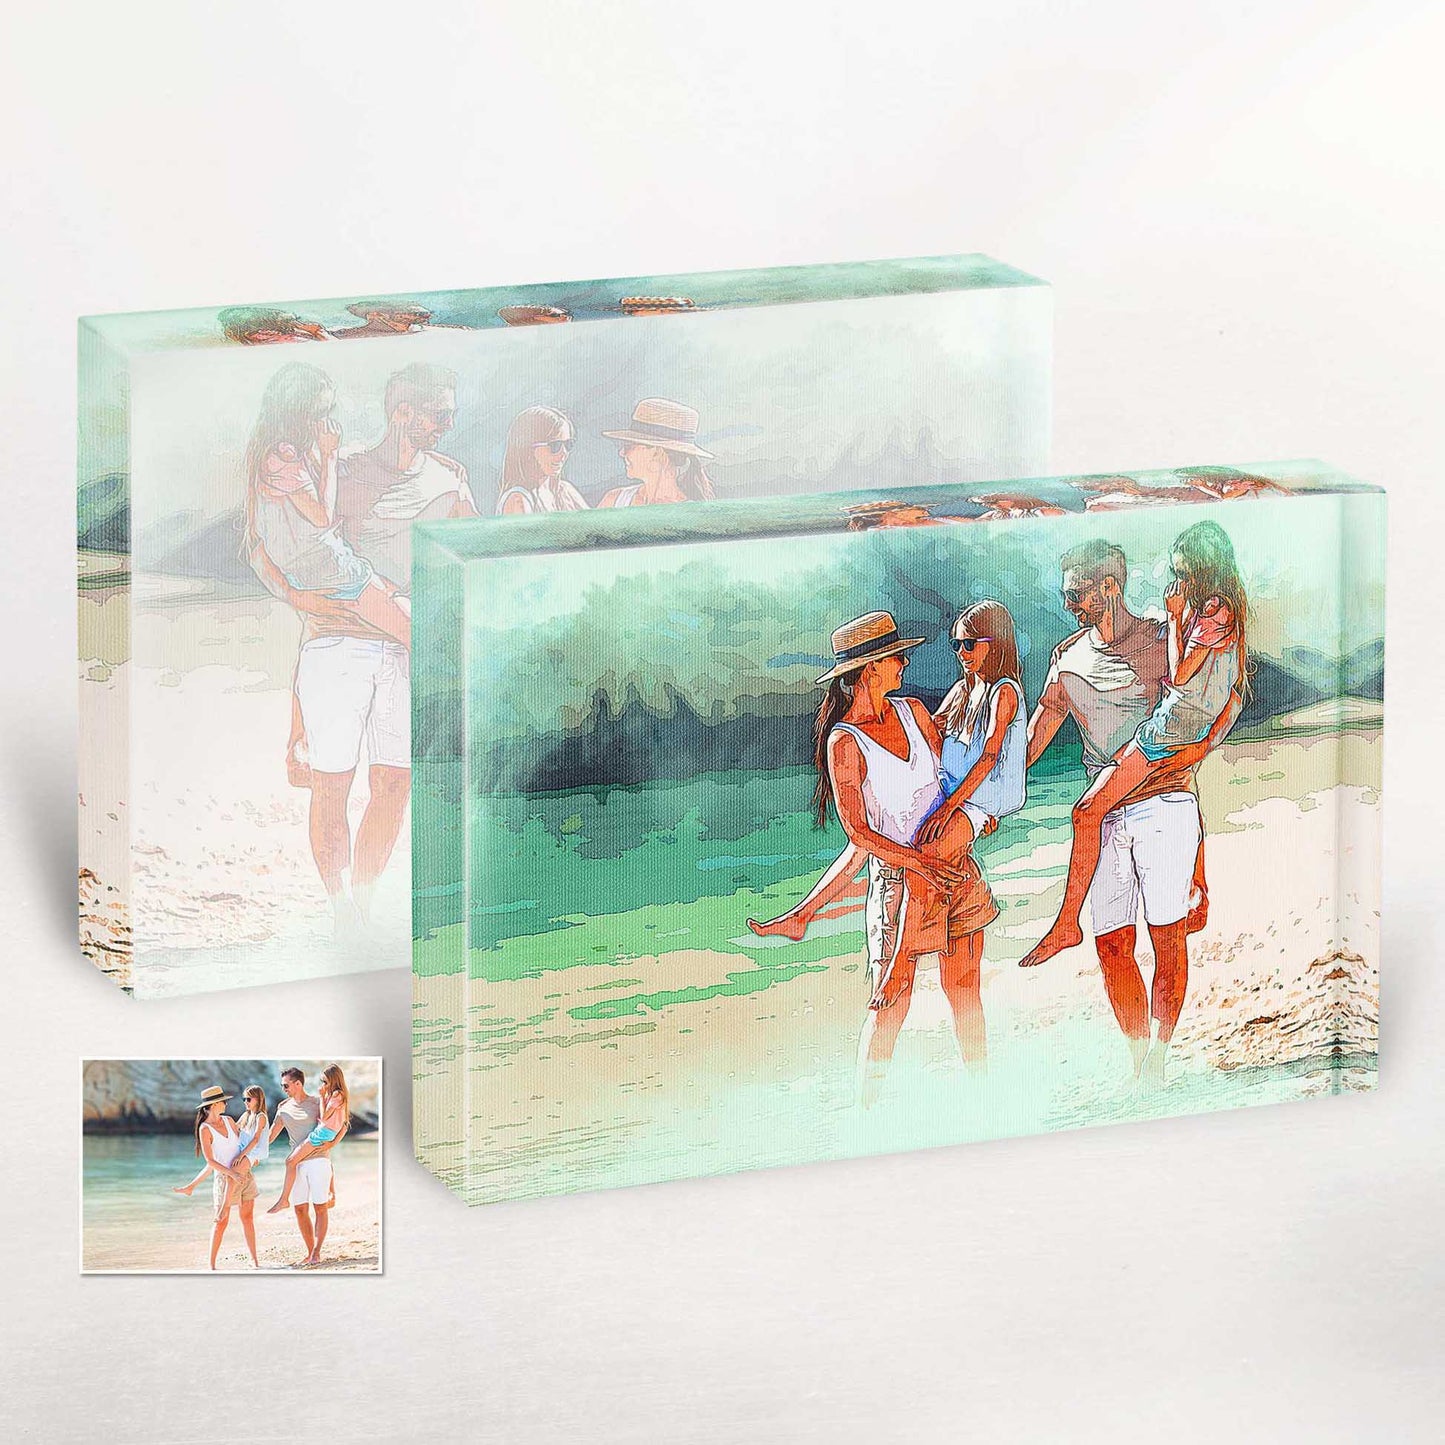 Add a touch of artistic beauty to your boho home decor with personalized watercolor texture painting acrylic block photos. Crafted from your own photos, they make meaningful Mother's Day gifts that capture cherished memories.